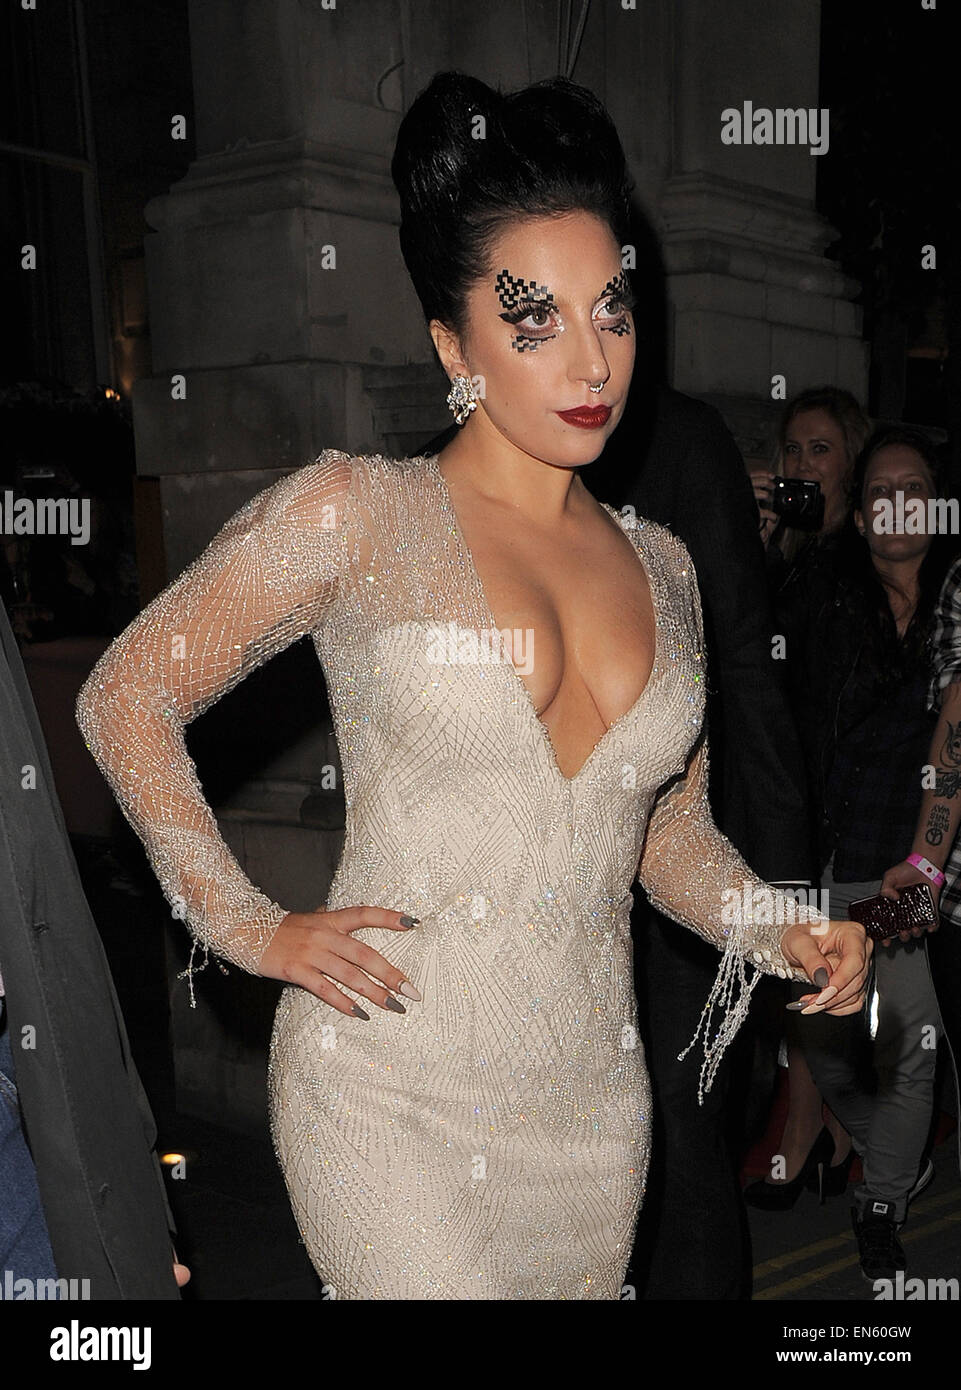 Lady Gaga displays ample cleavage as she leaves her London hotel